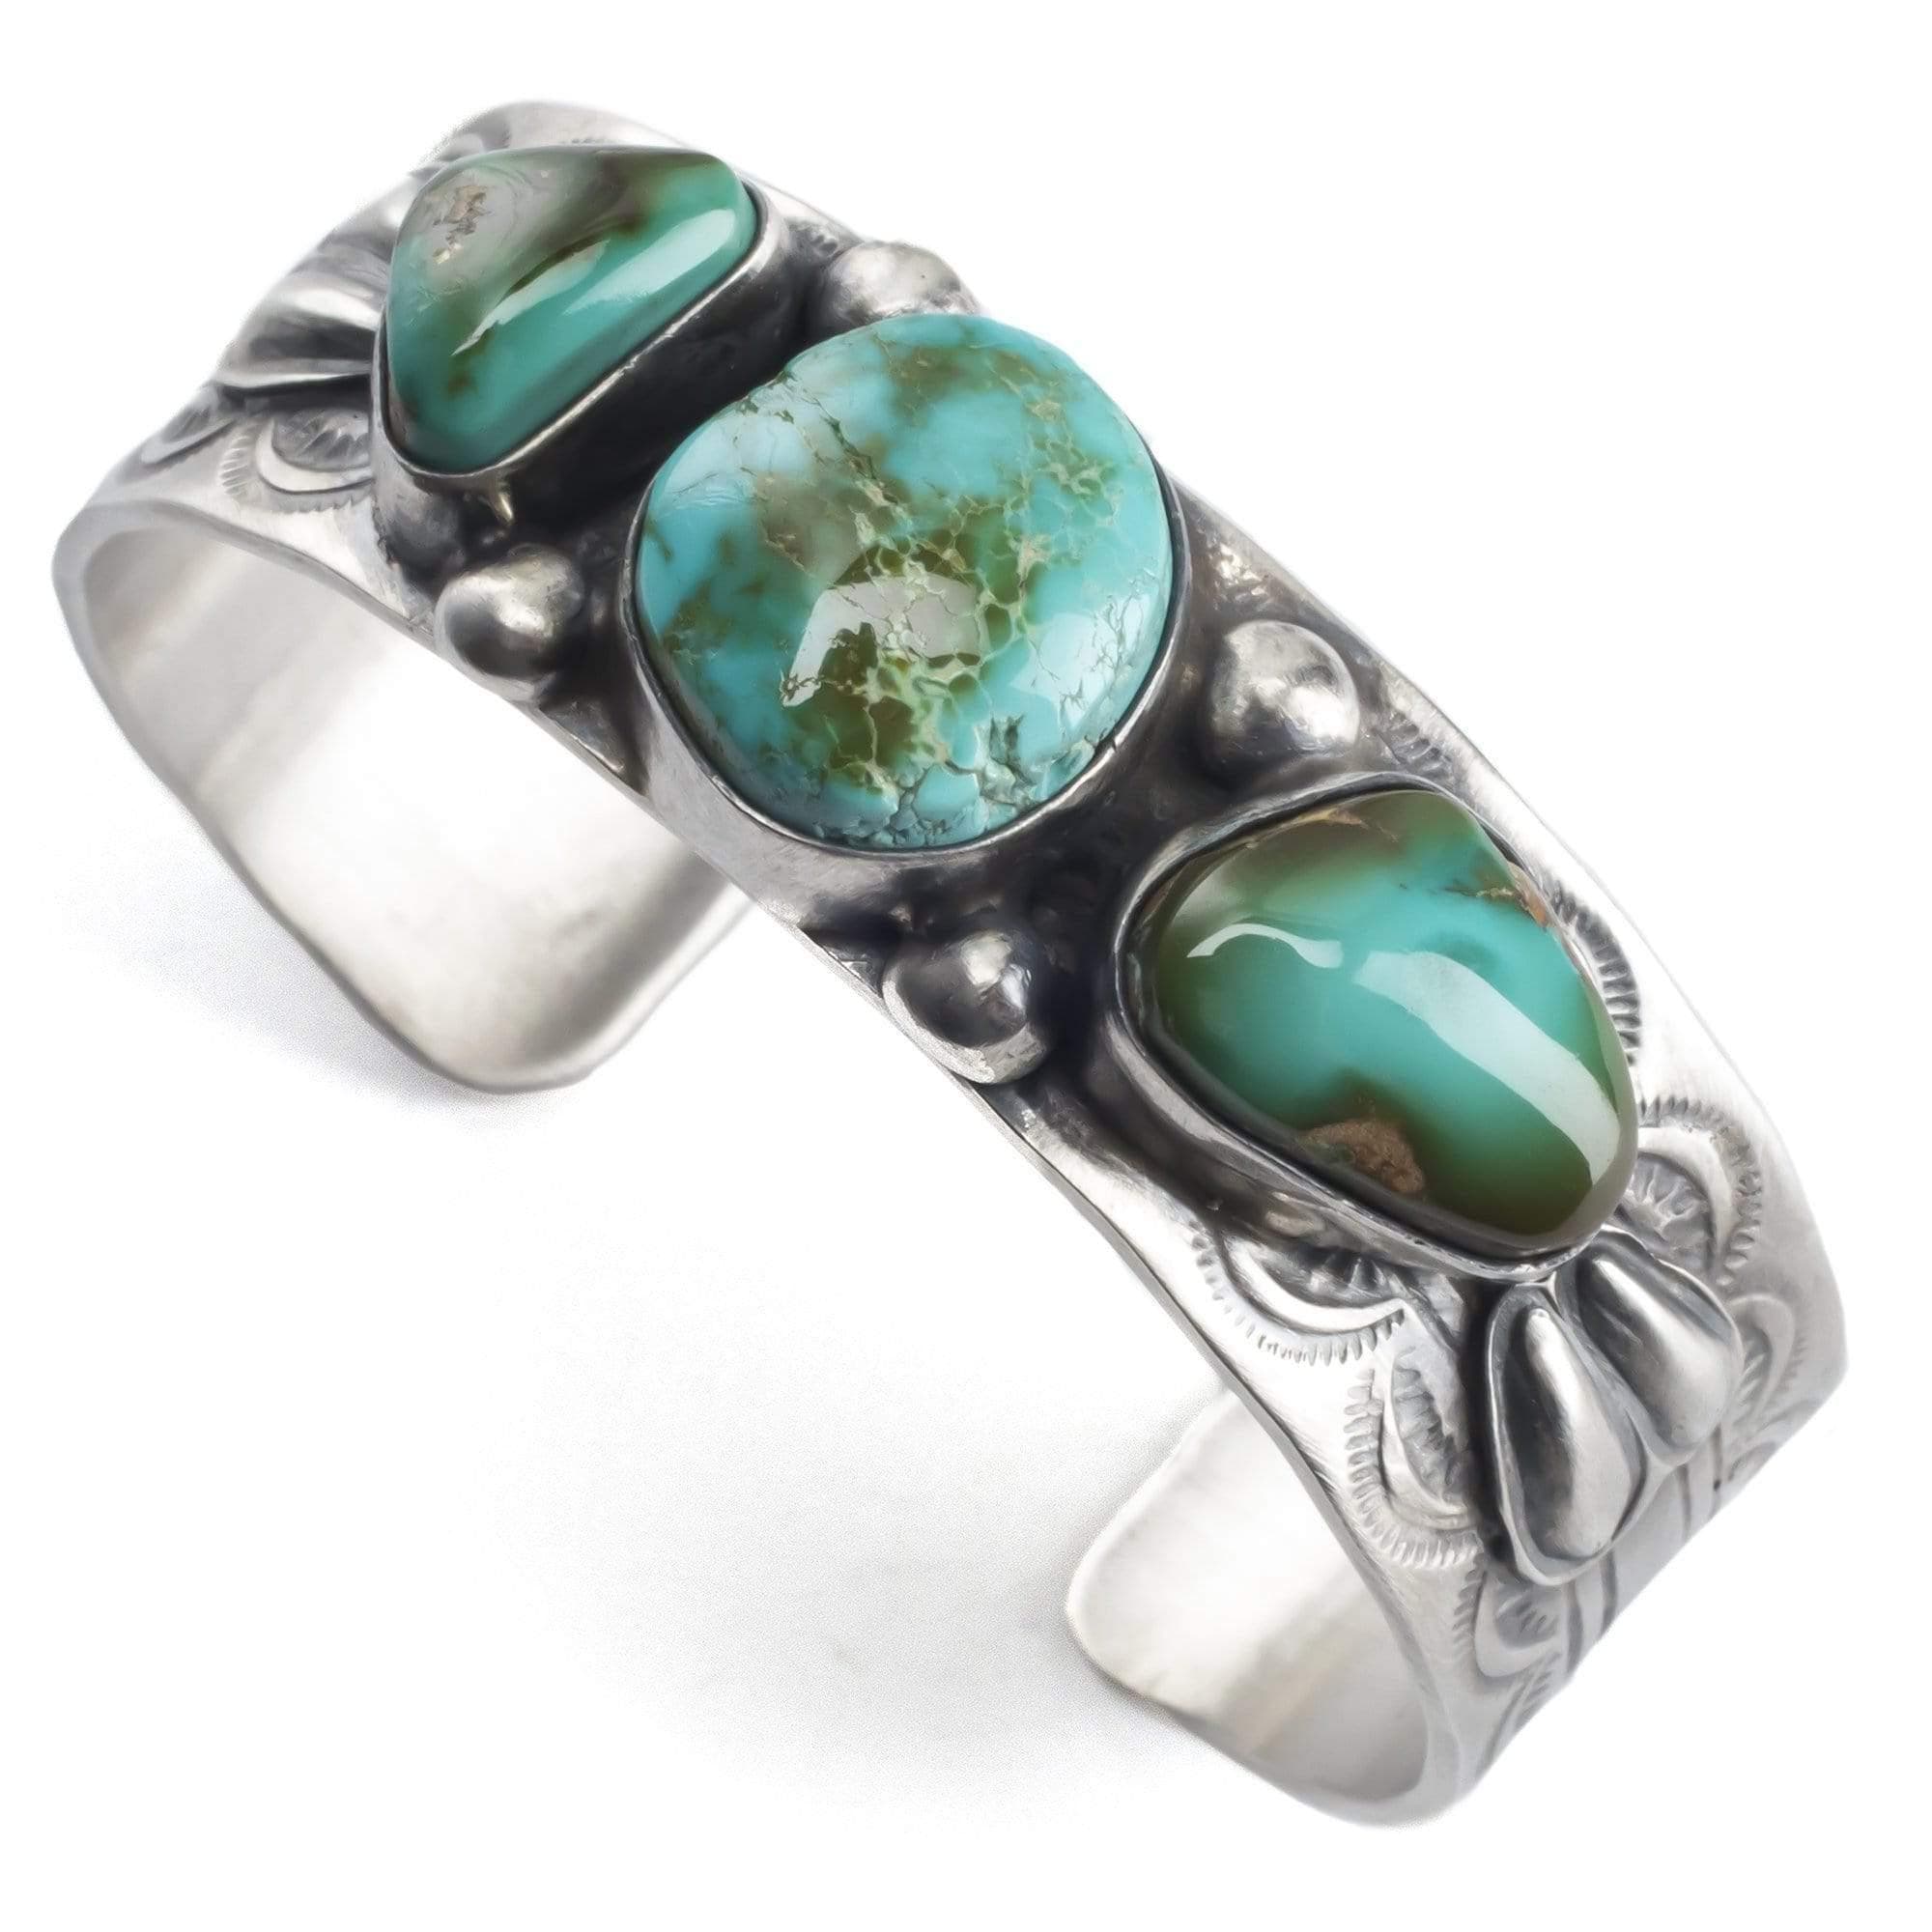 Kalifano Native American Jewelry Royston Turquoise Native American Made 925 Sterling Silver Cuff NAB2700.005